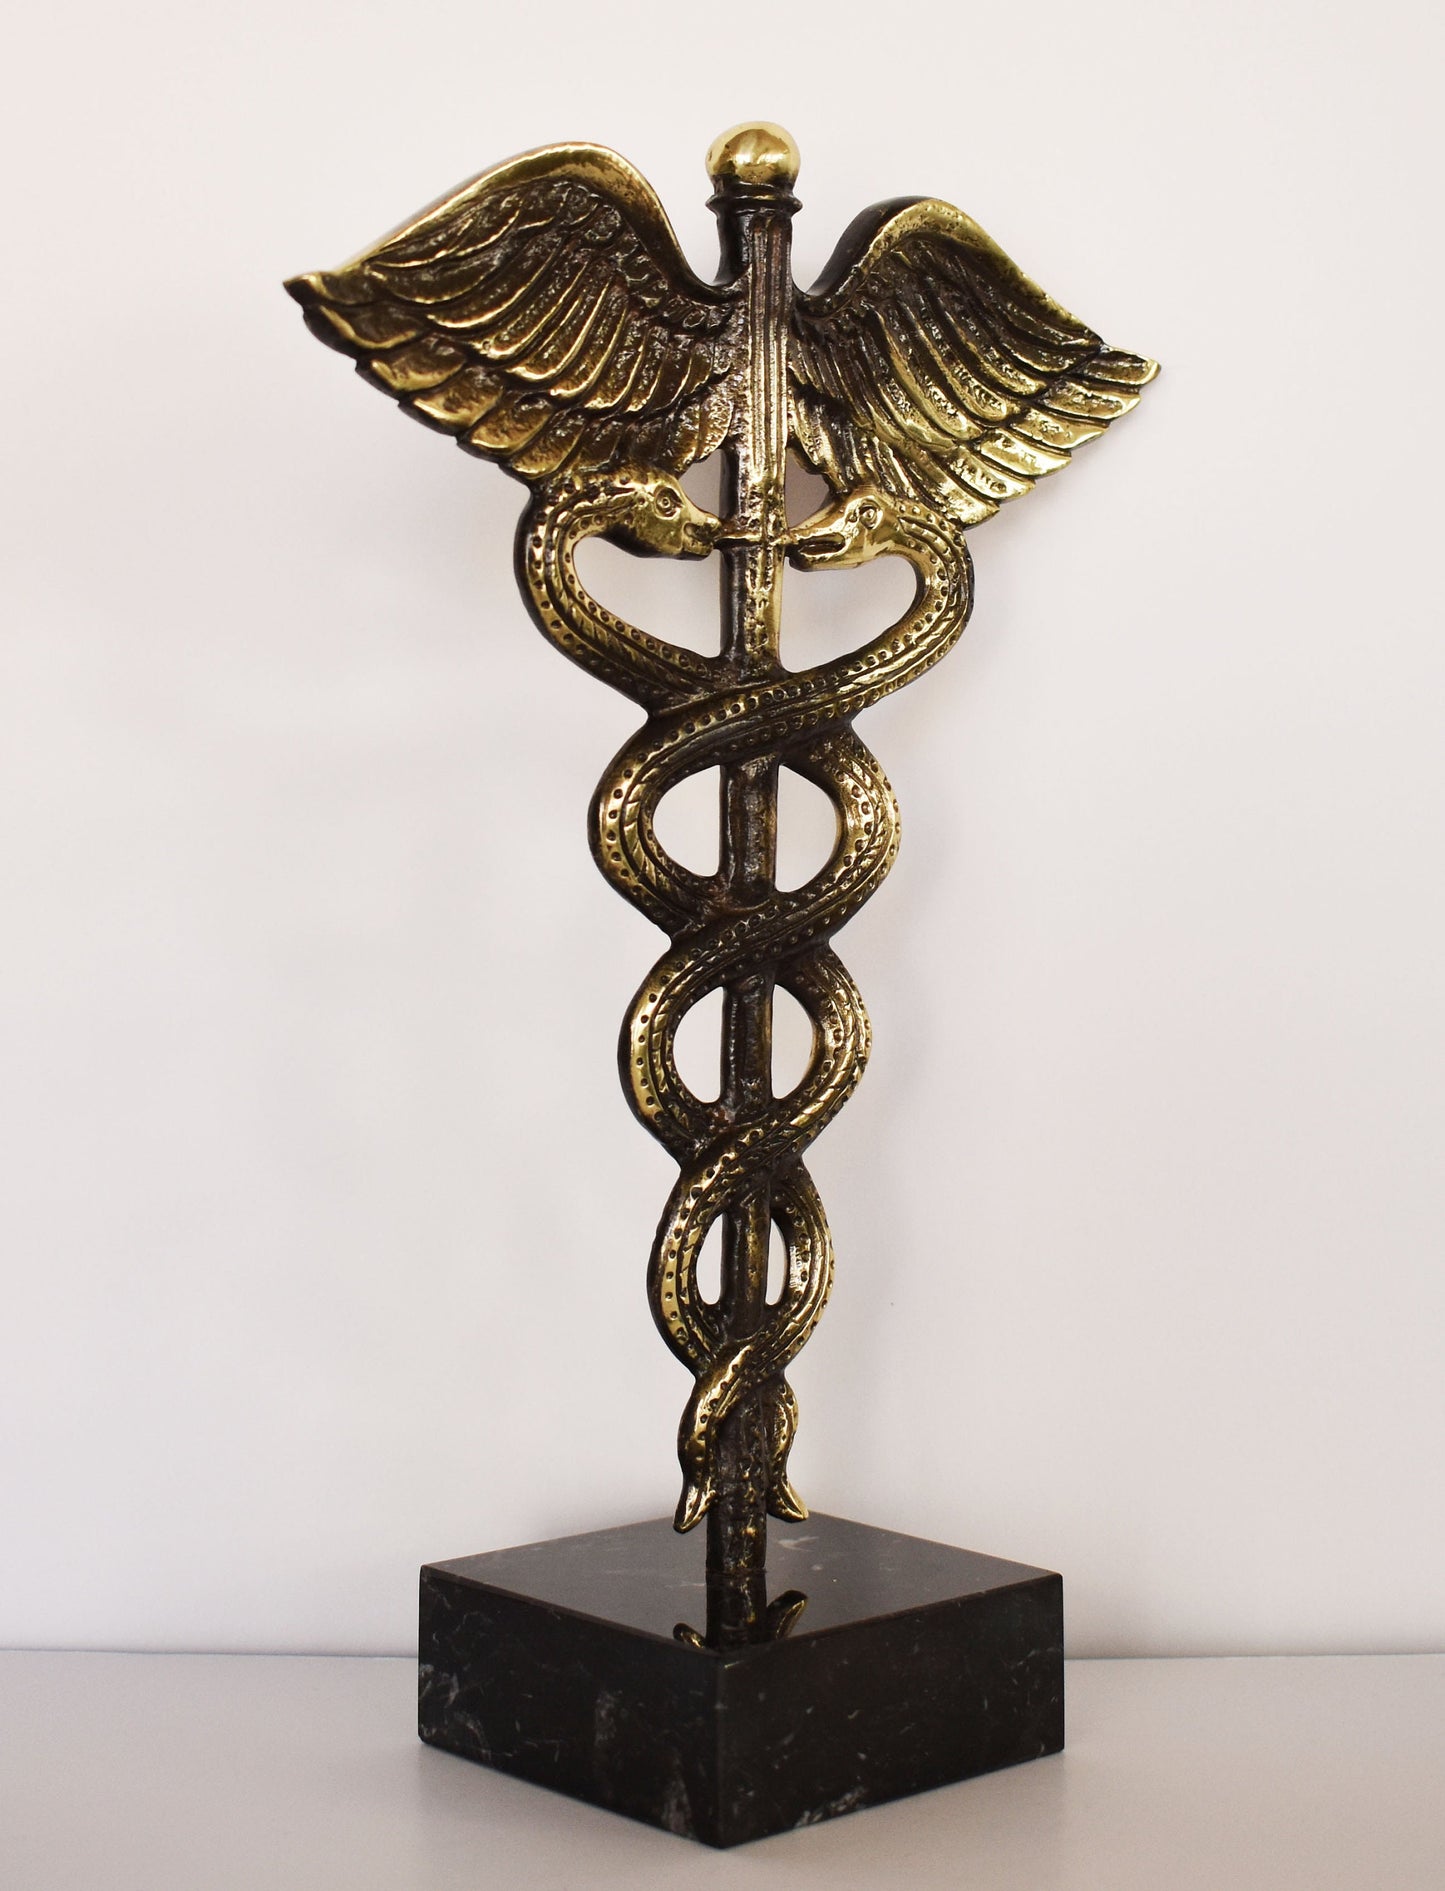 Caduceus - Symbol of God Hermes Mercury - Short Staff entwined by two Serpents, surmounted by Wings - pure bronze  statue